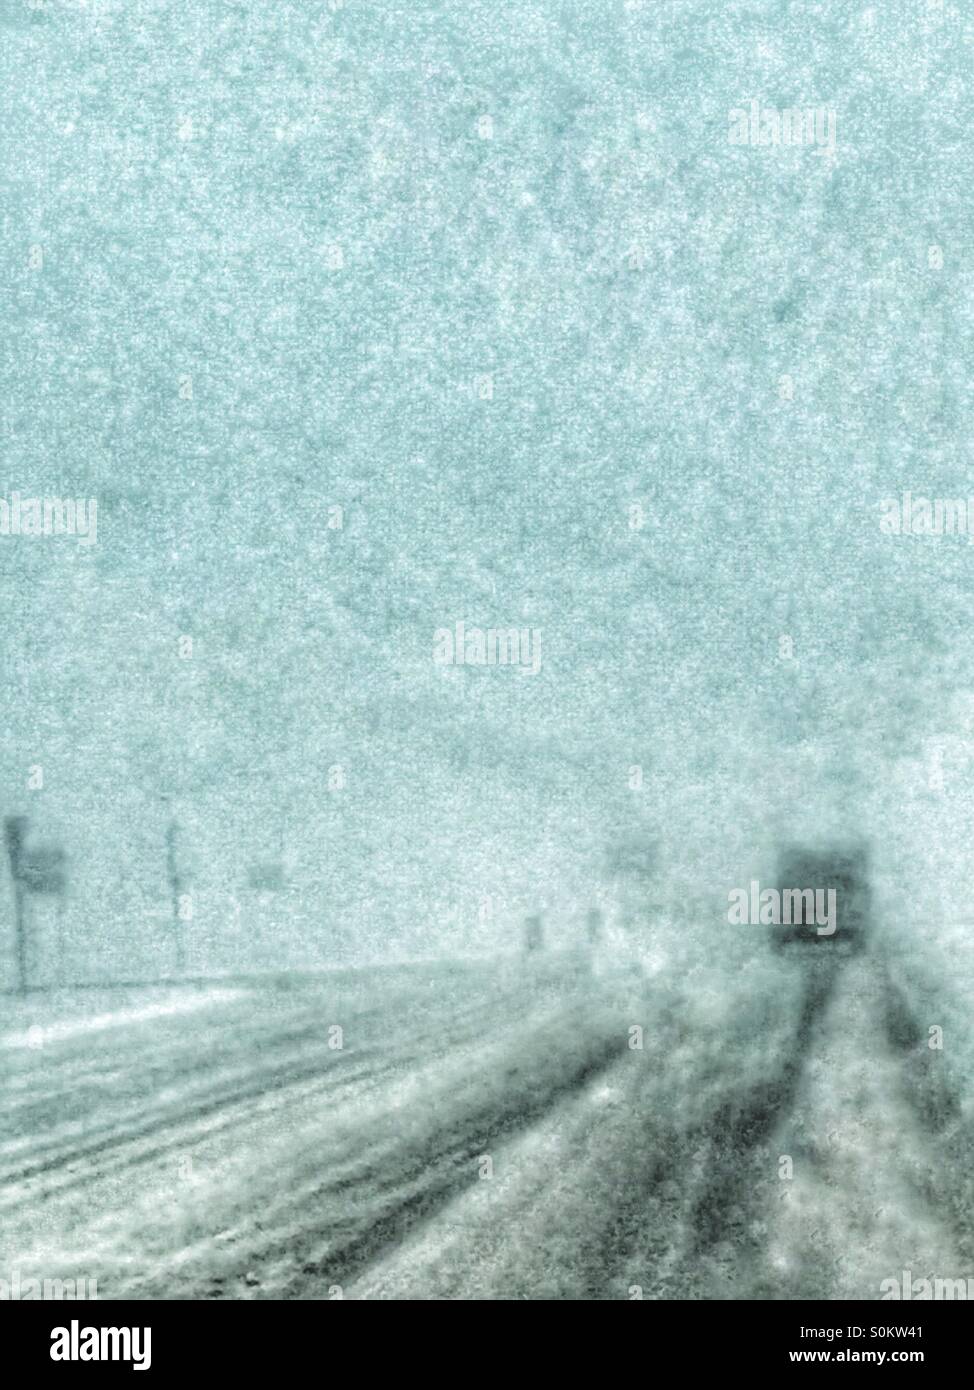 White out conditions on icy road Stock Photo